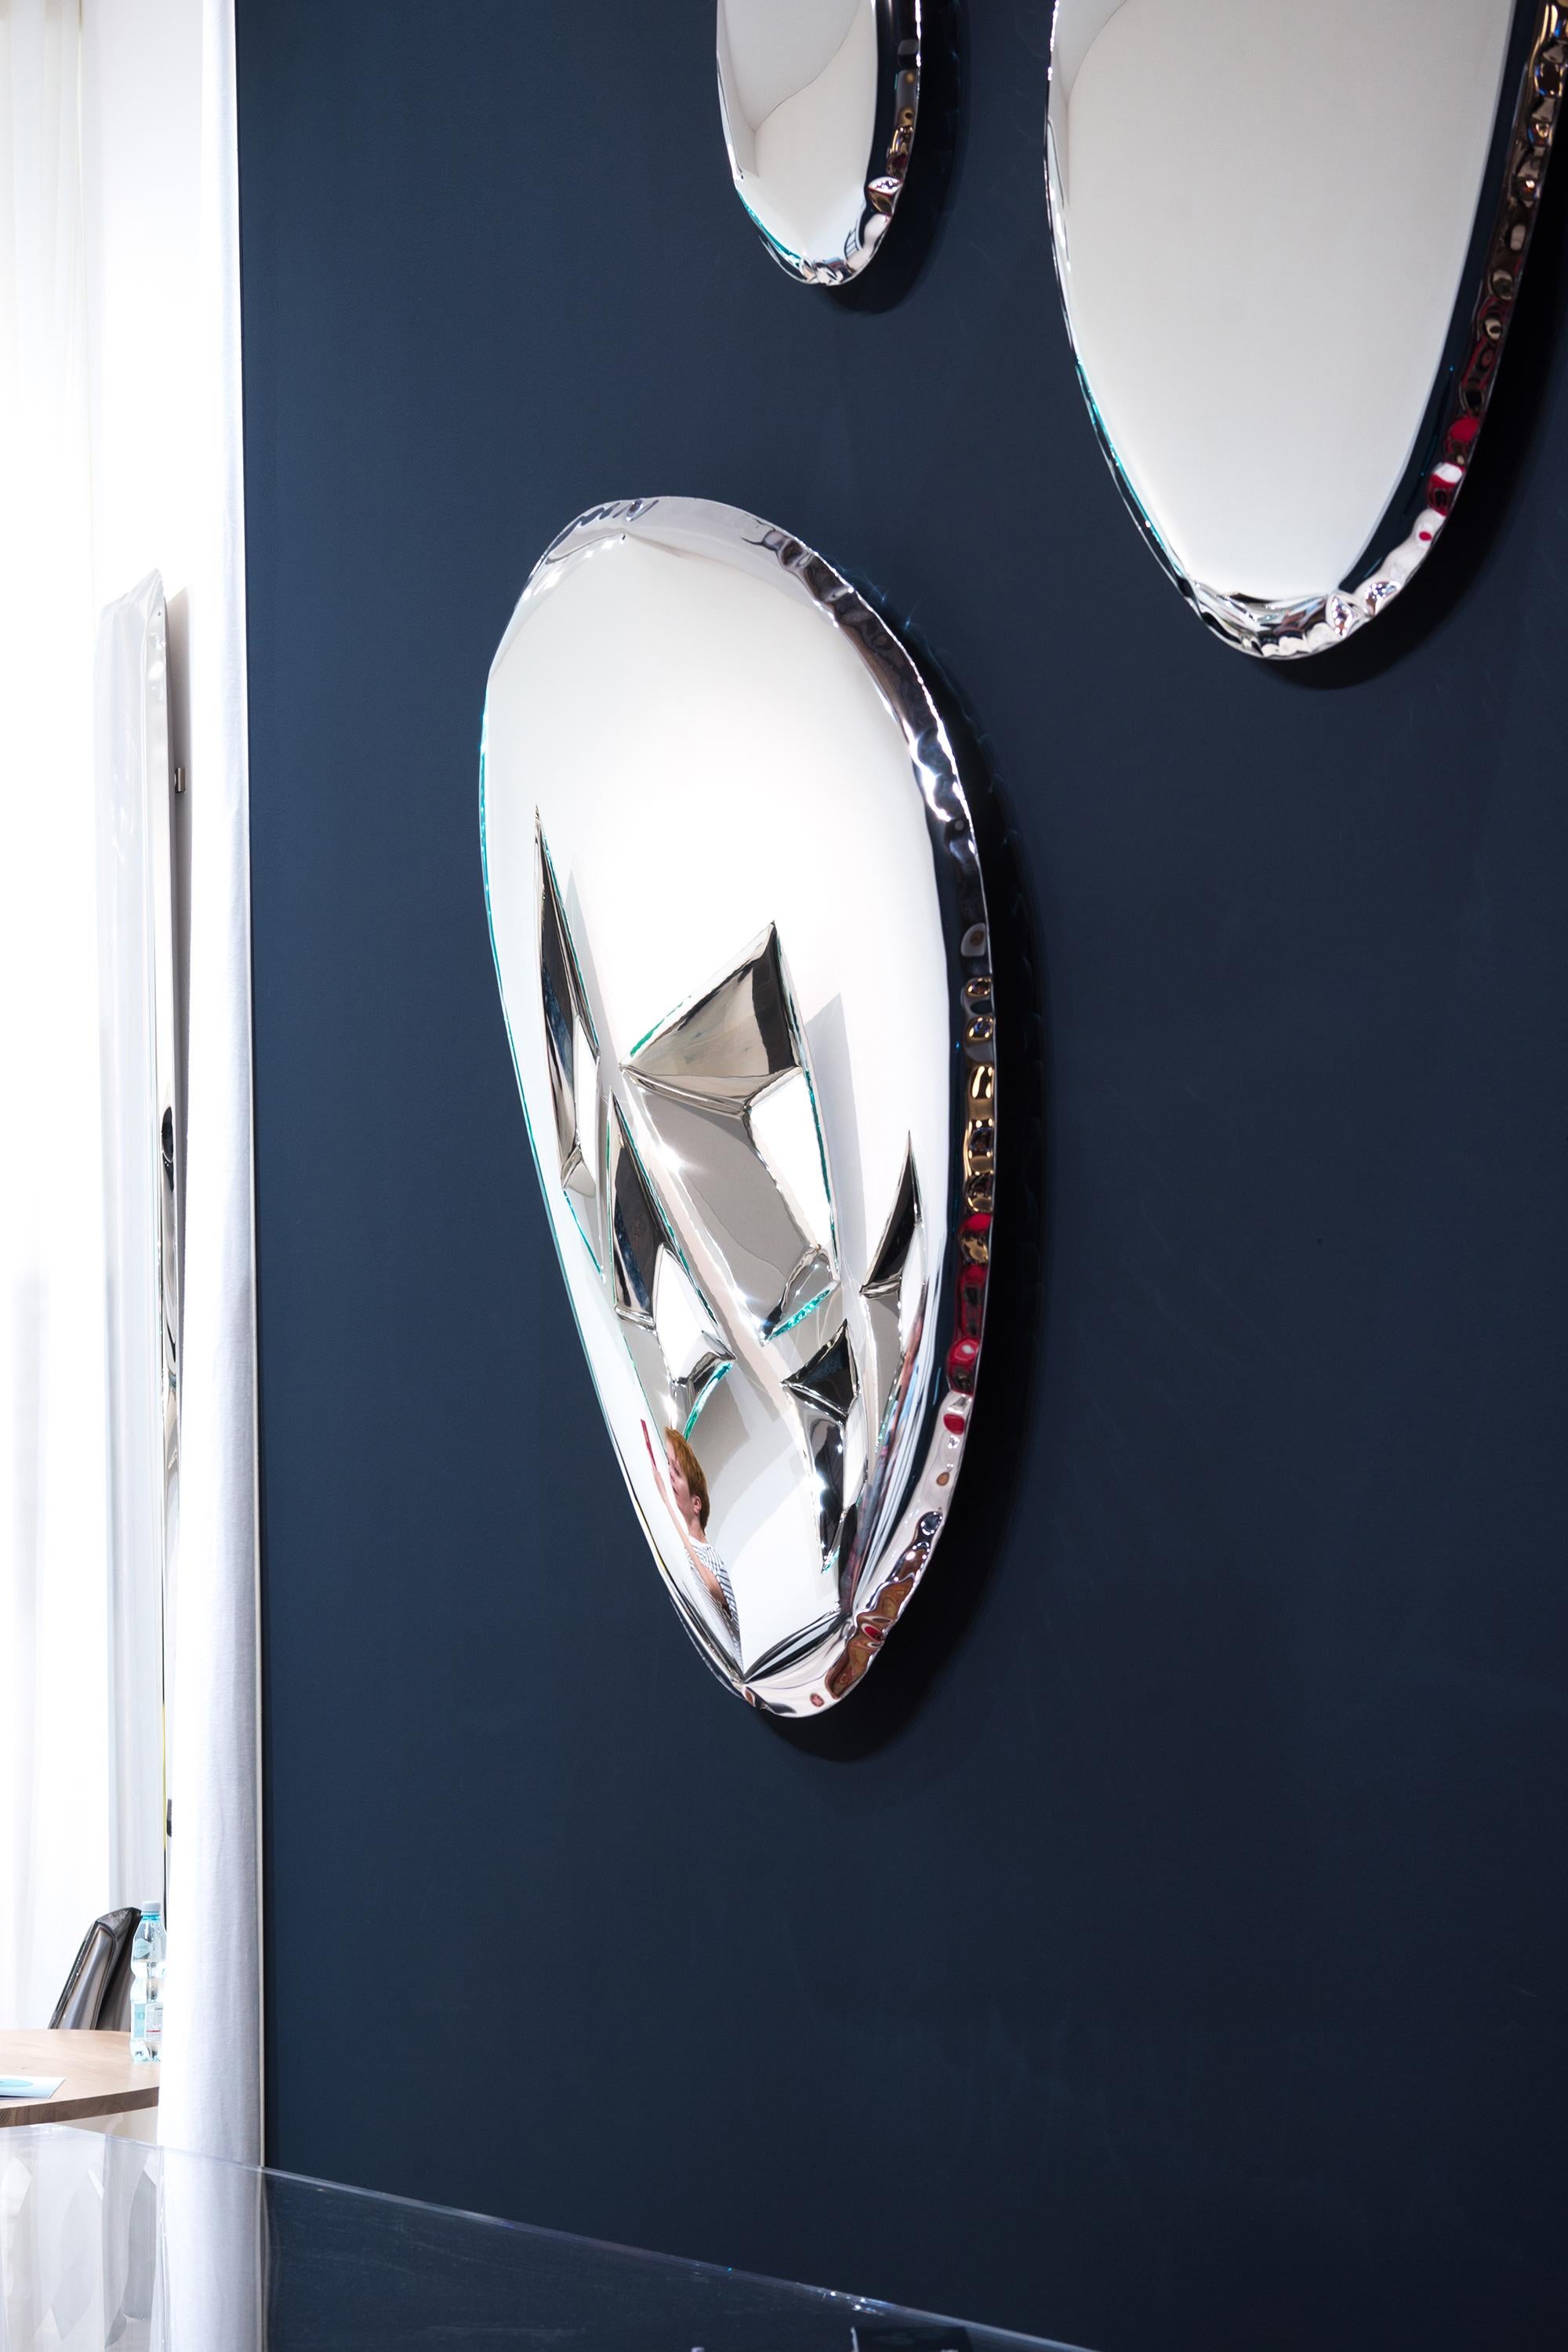 TAFLA O series is characterized by smooth, optically light shapes inspired by liquid droplets and thanks to its unique form, combines the world of design, art and technology. TAFLA collection is a radical step towards such transformations. Mirrors